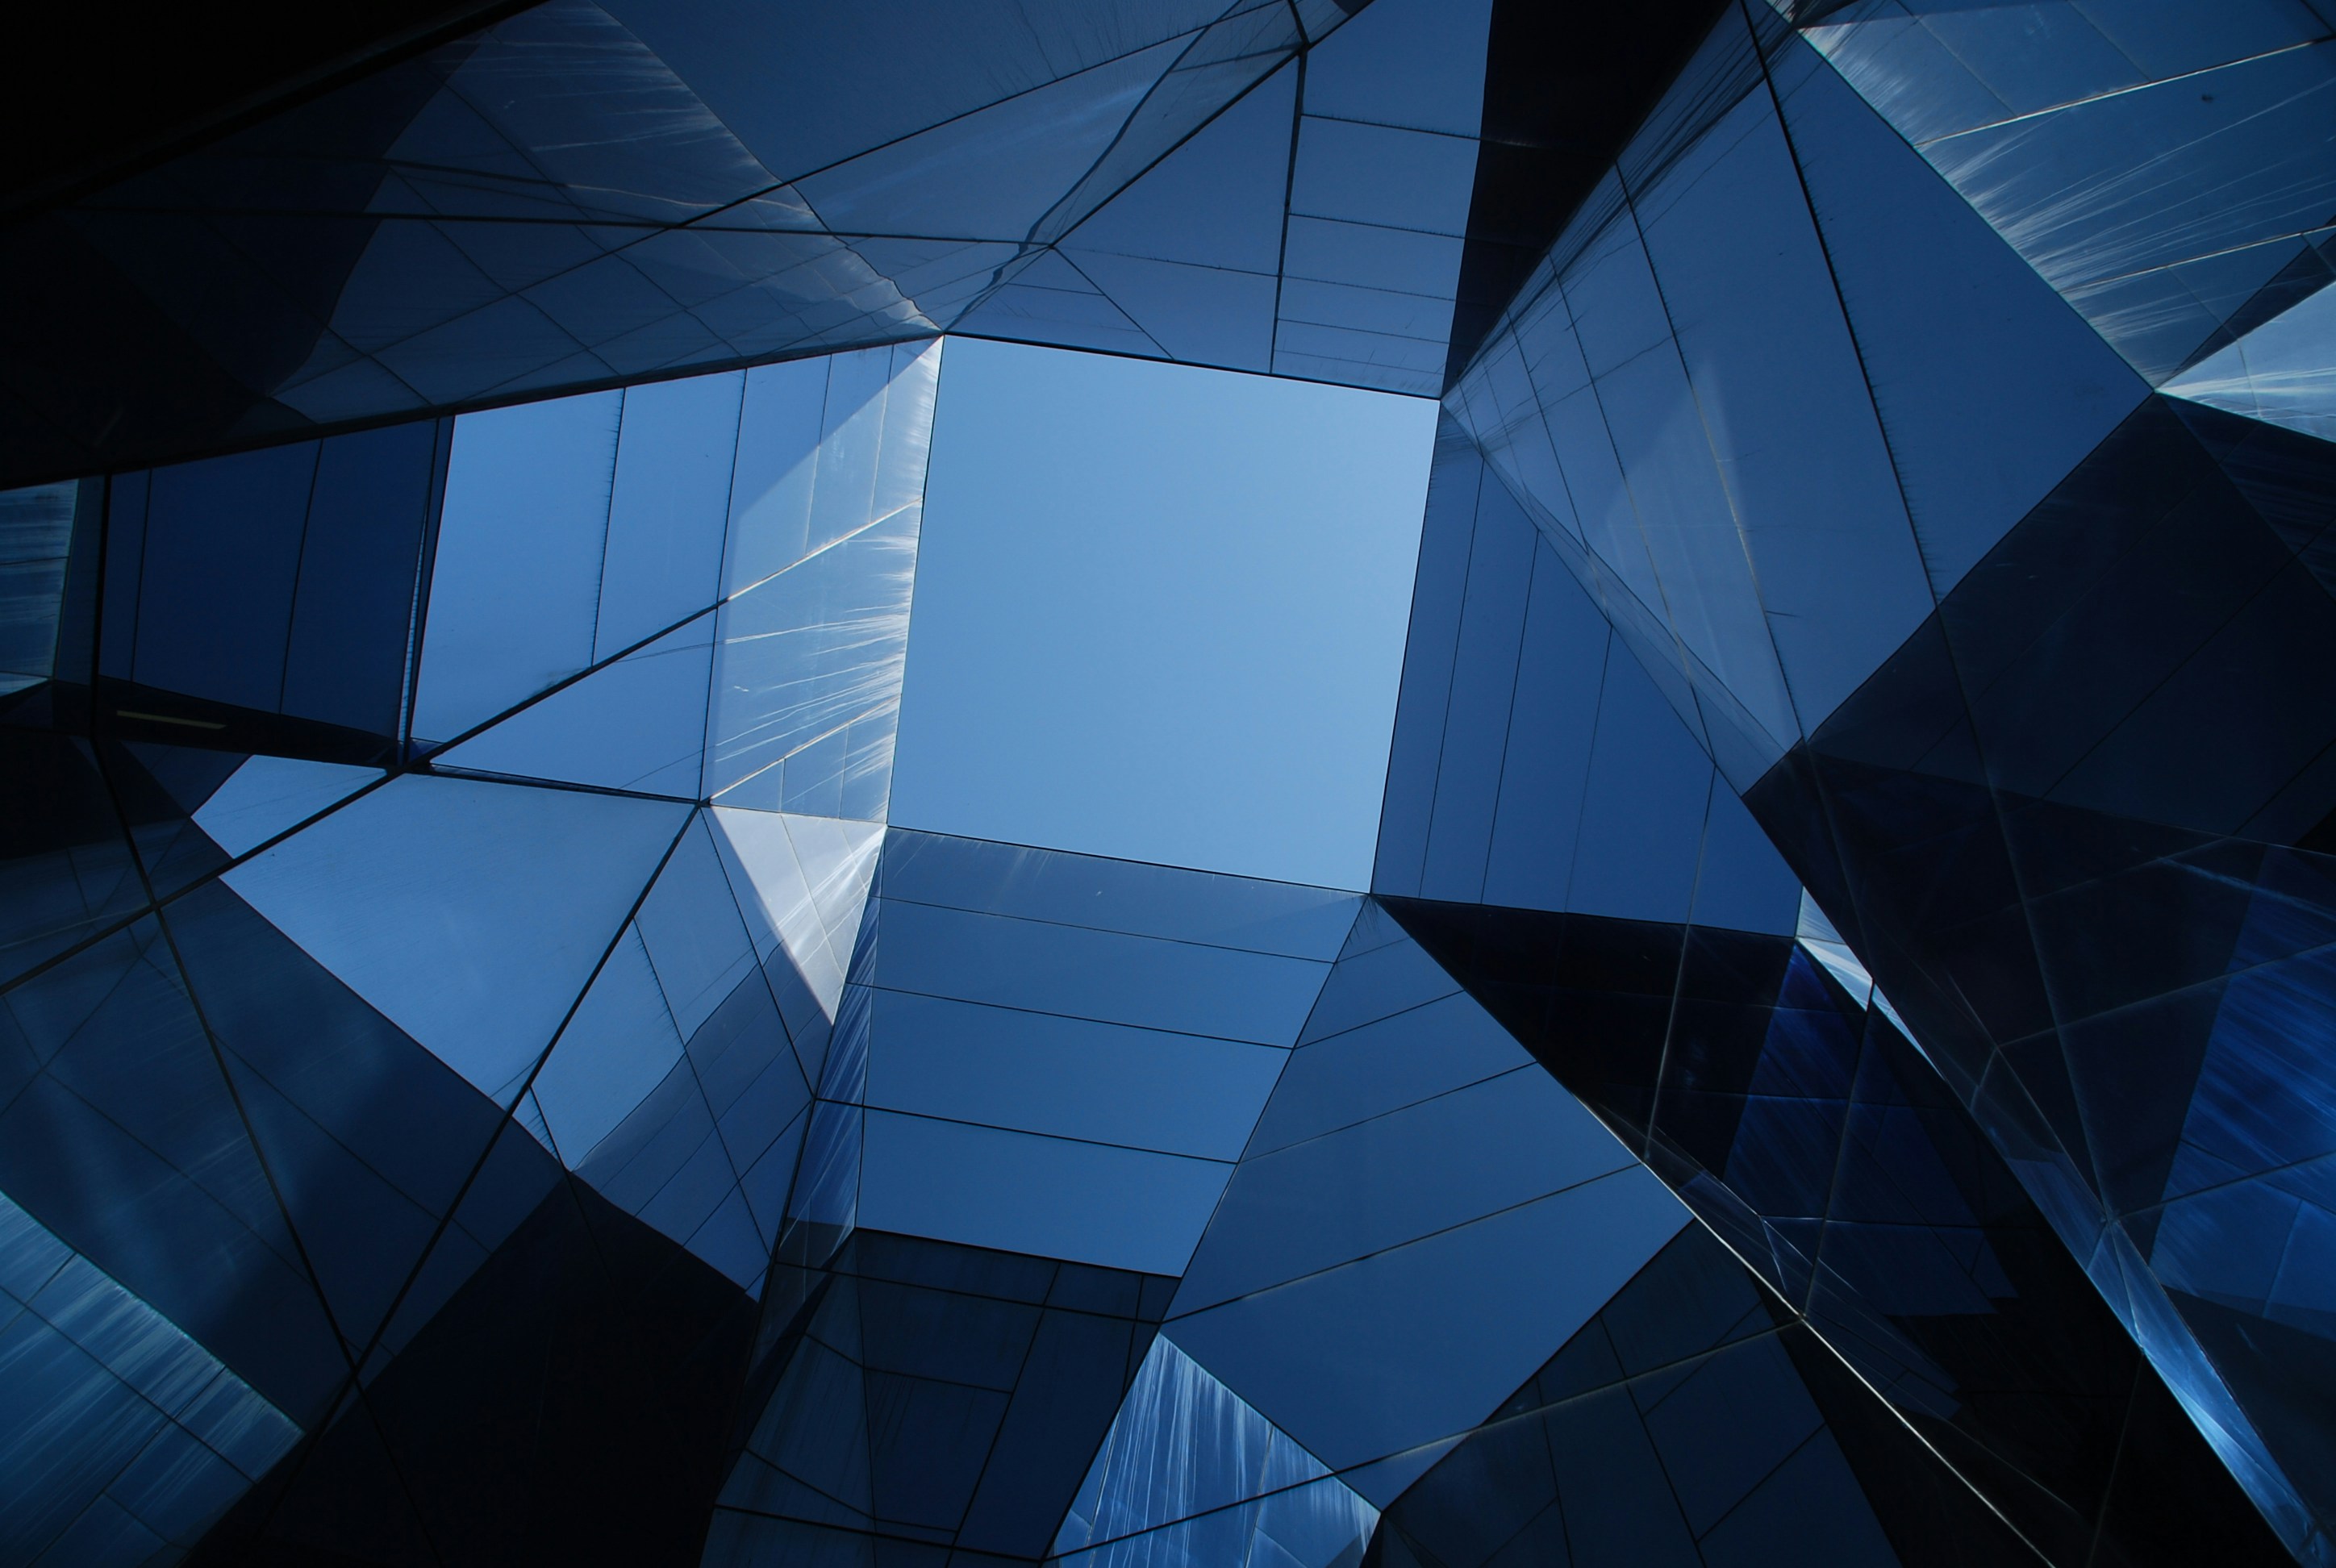 Abstract view looking up at modern glass buildings reflecting the blue sky